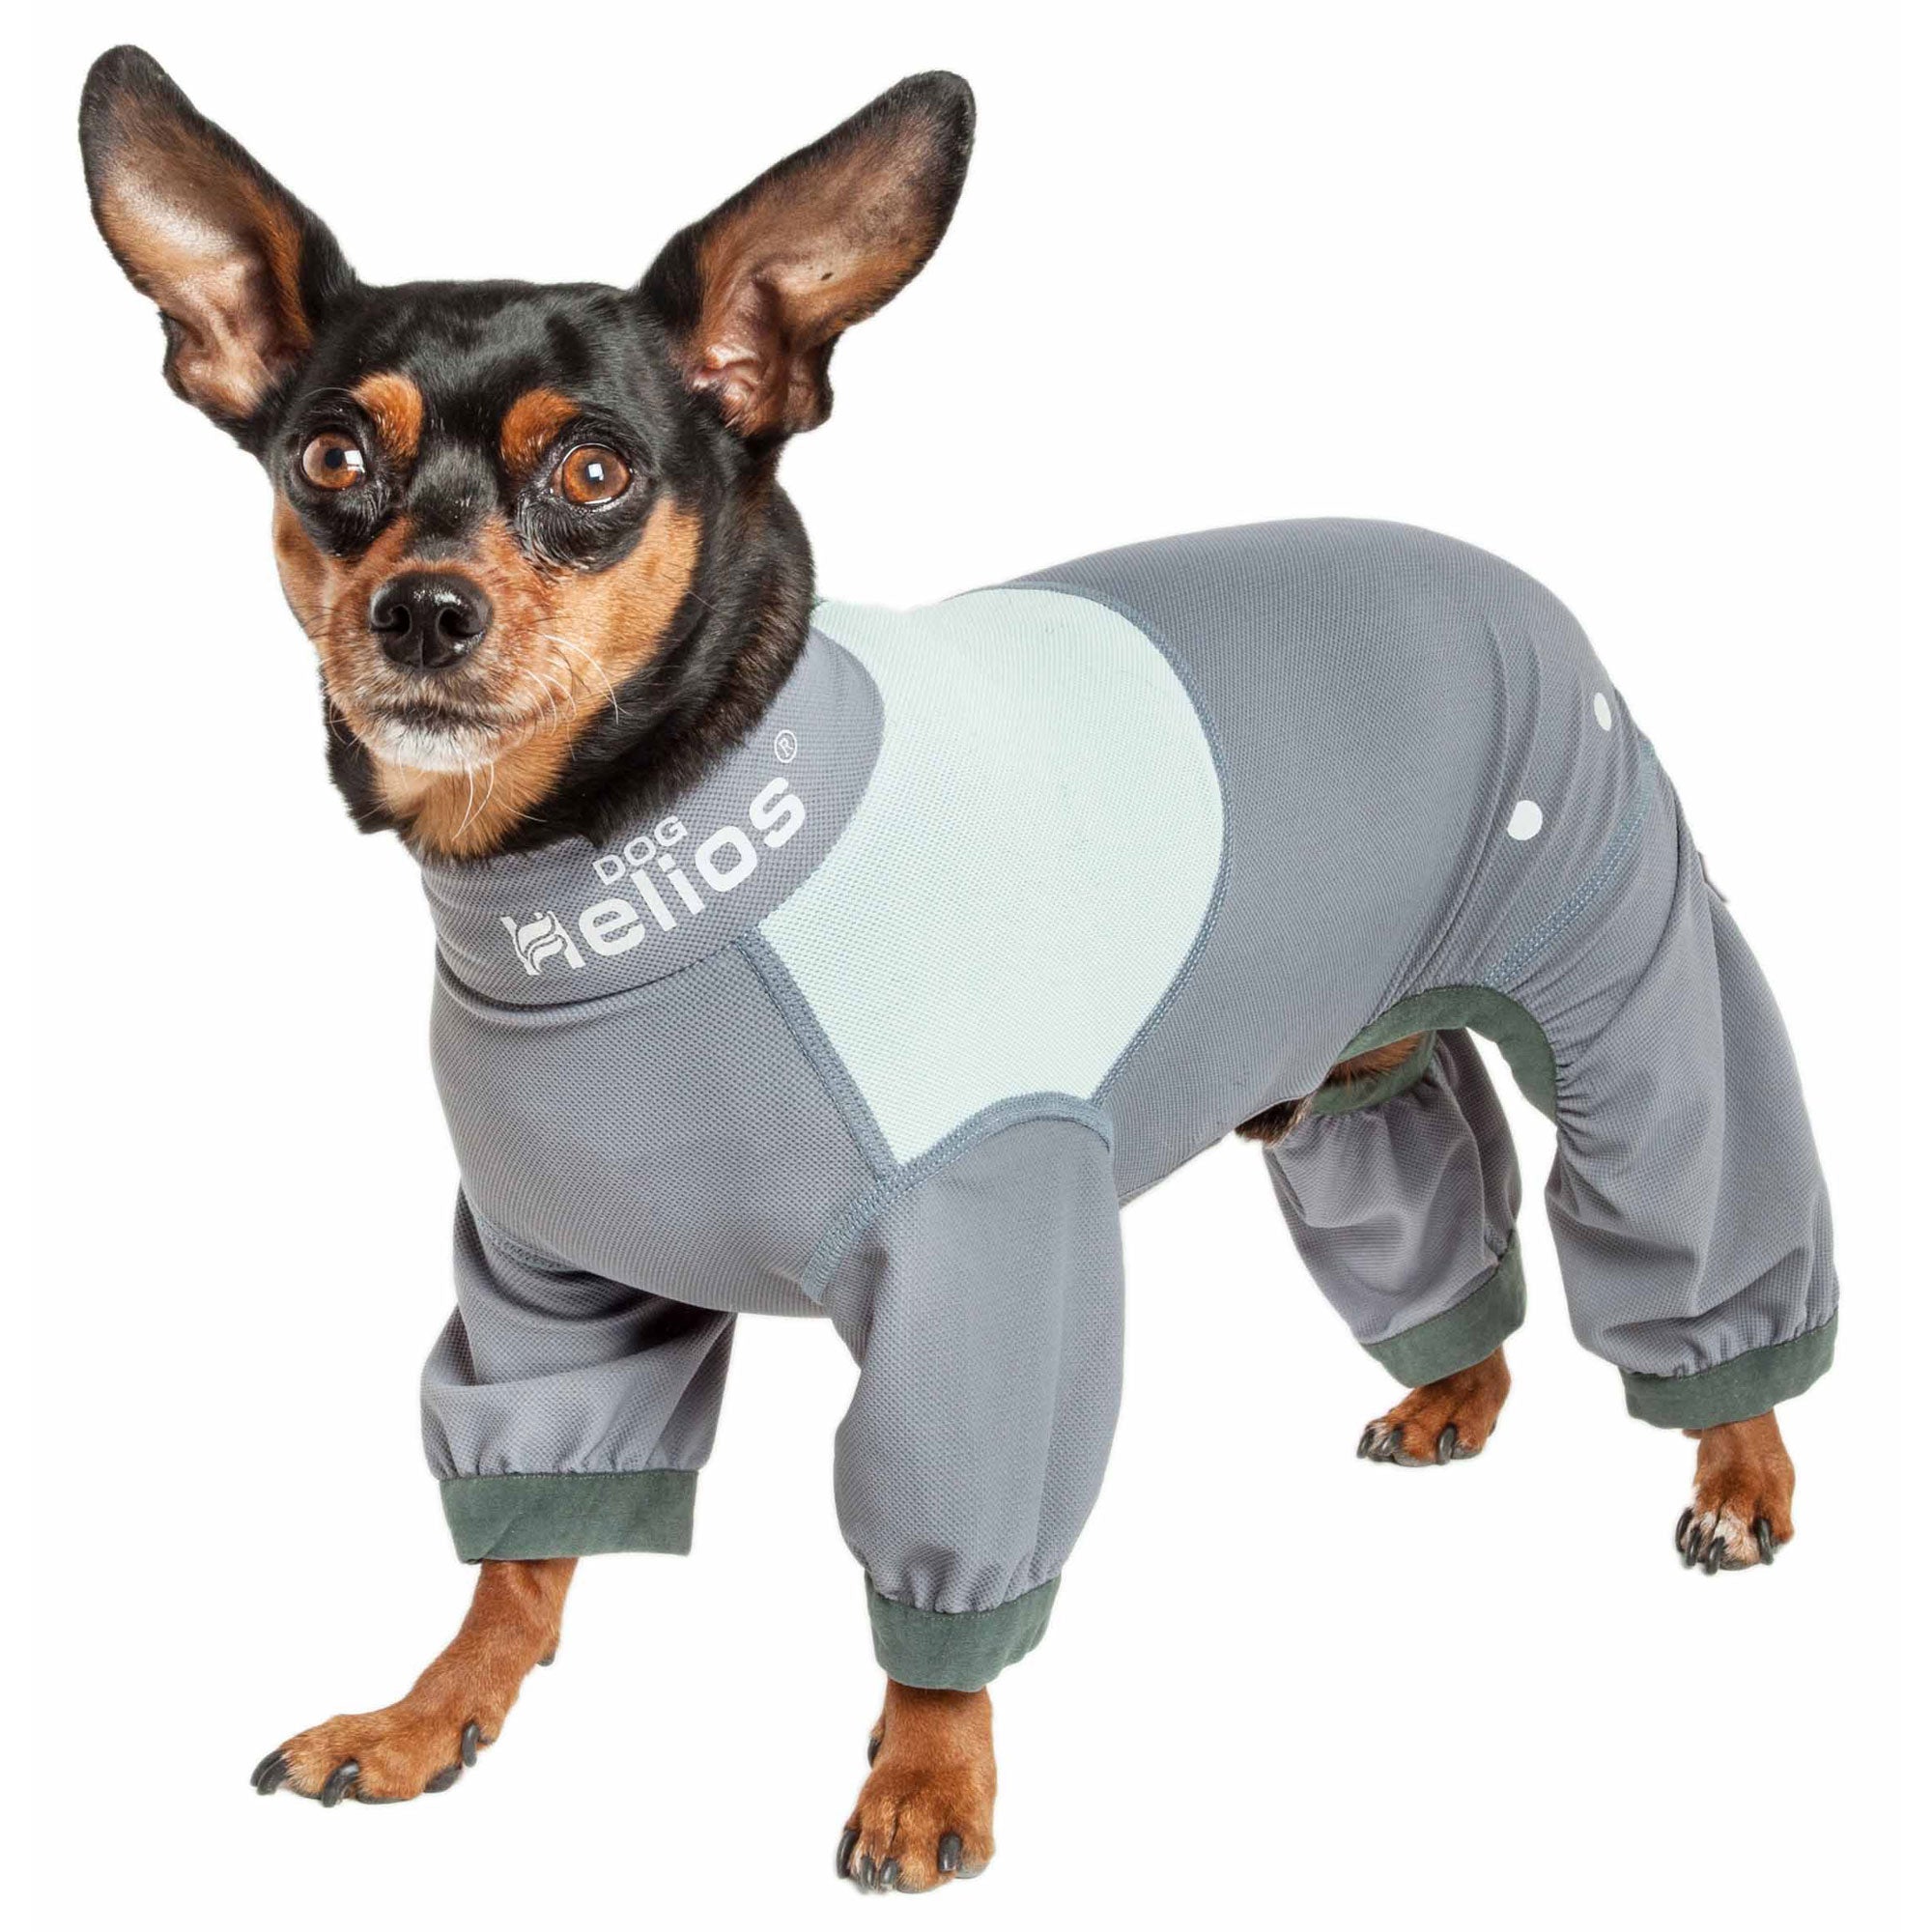 Dog Helios® Tail Runner Dog Track Suit - Gray - X-small